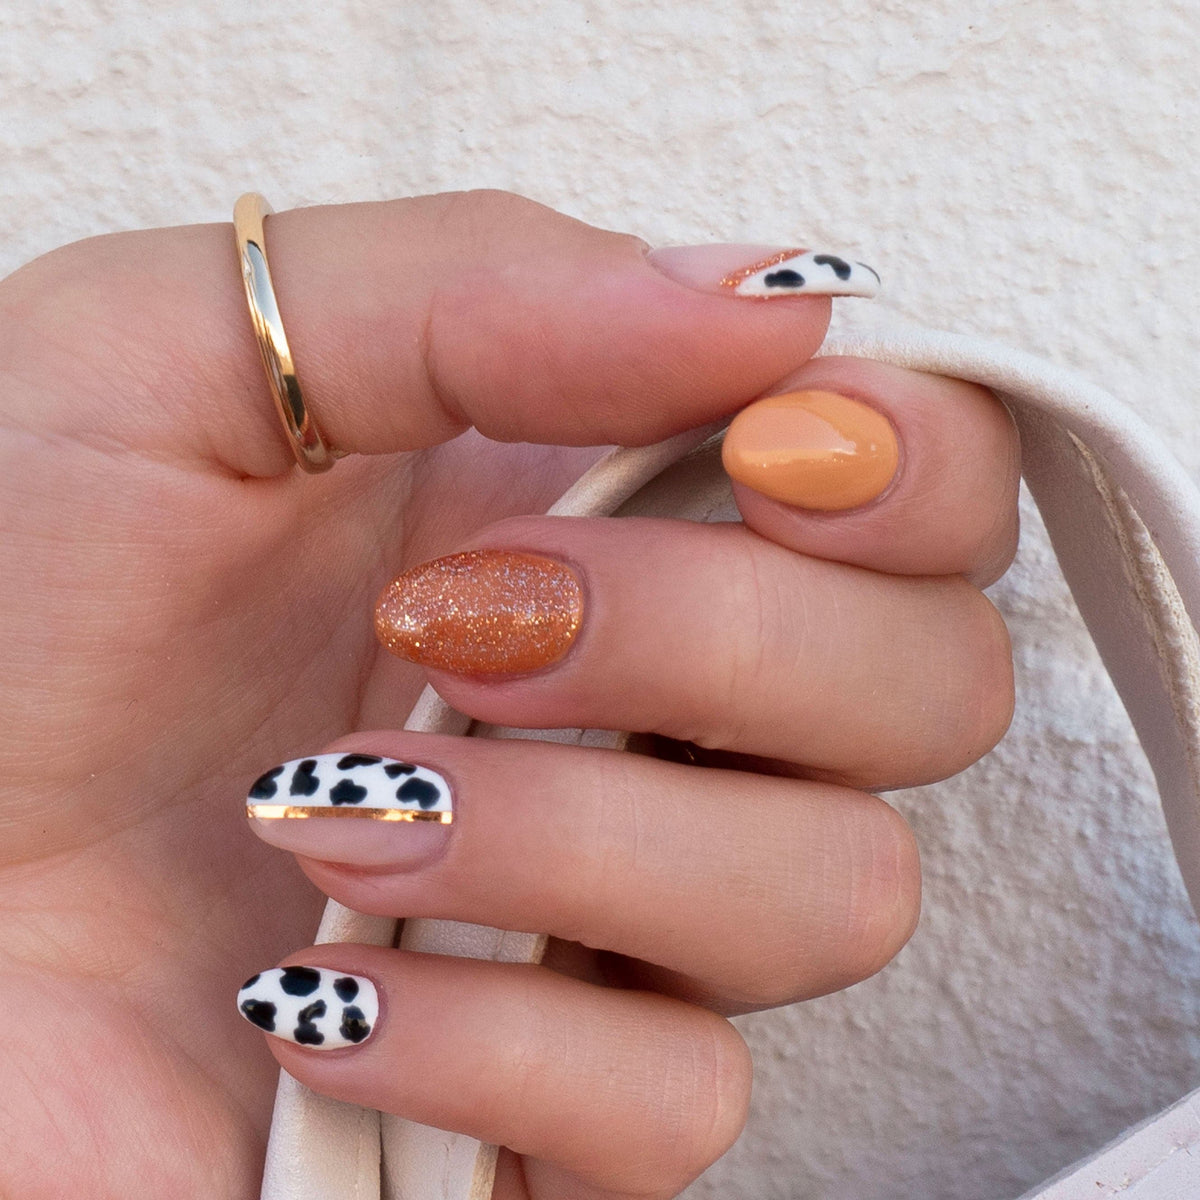 Copper Nail Art Striping Tape - photographed in New Zealand on model